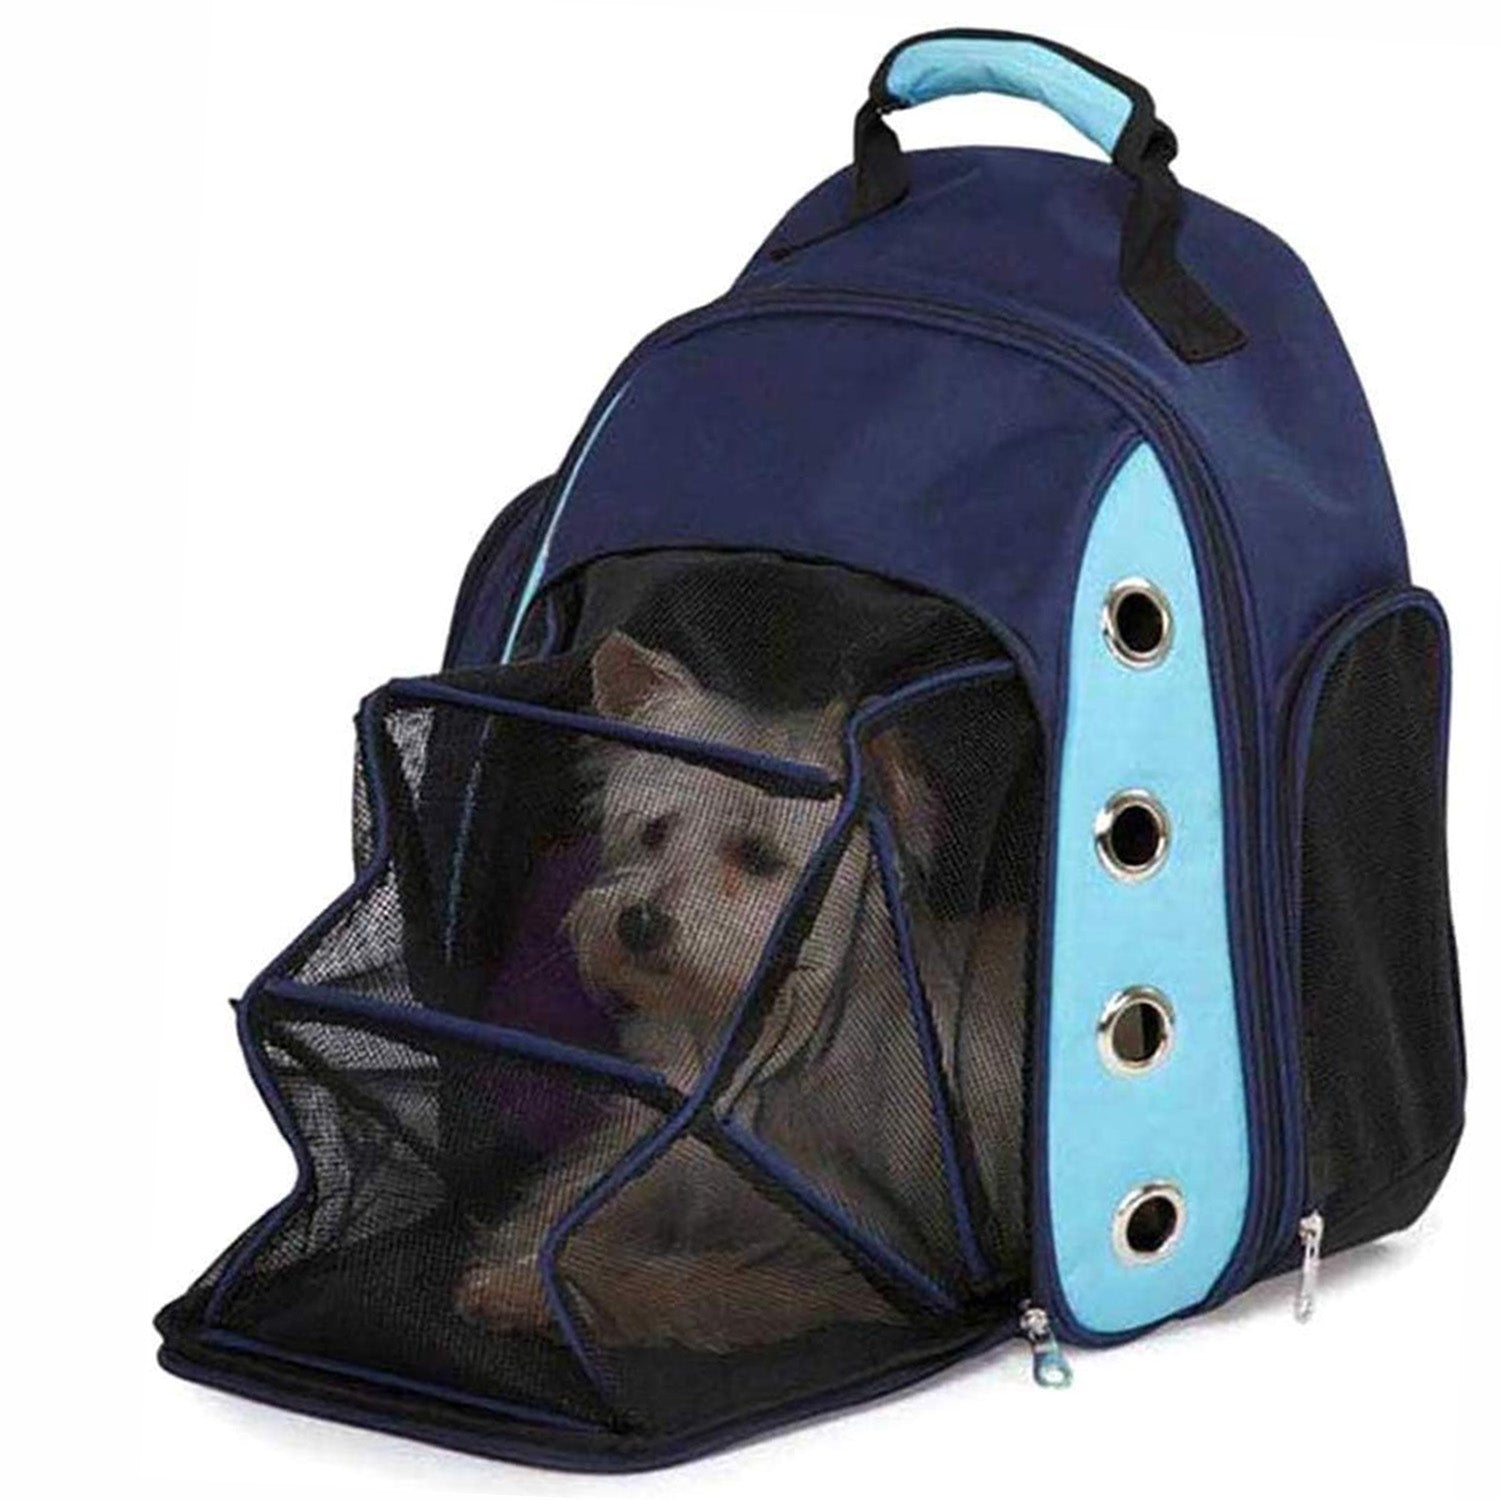 LUCKYERMORE Pet Carrier Backpack With Mesh Widow Dog Cat Small Animals Travel Bag, Blue